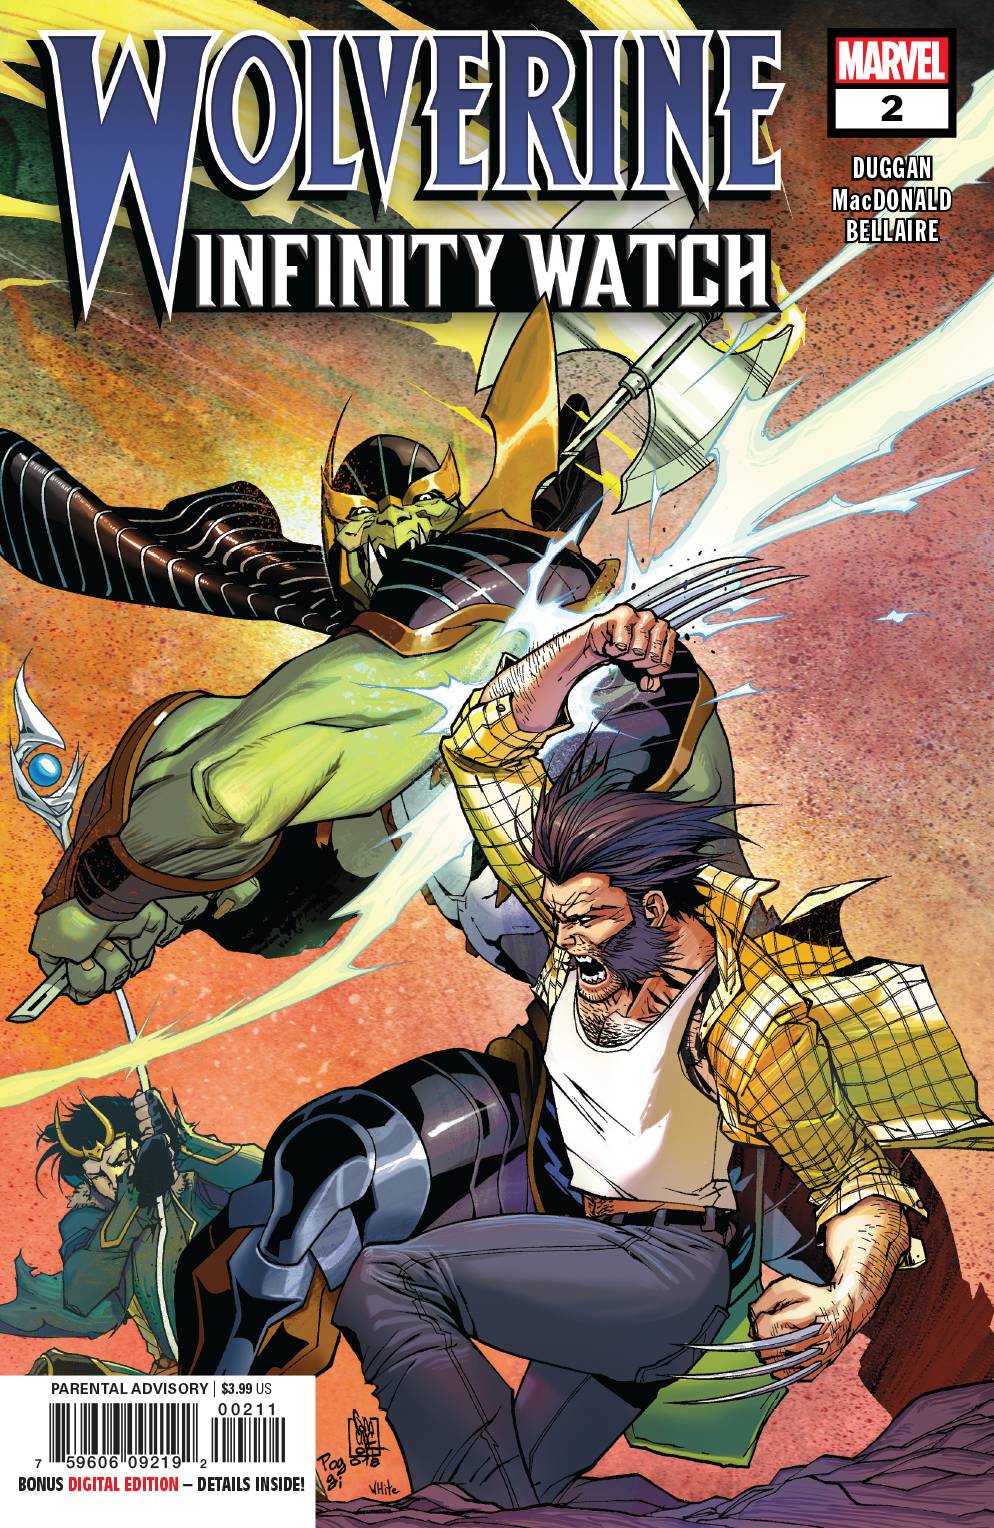 WOLVERINE INFINITY WATCH #2 (OF 5) 2019